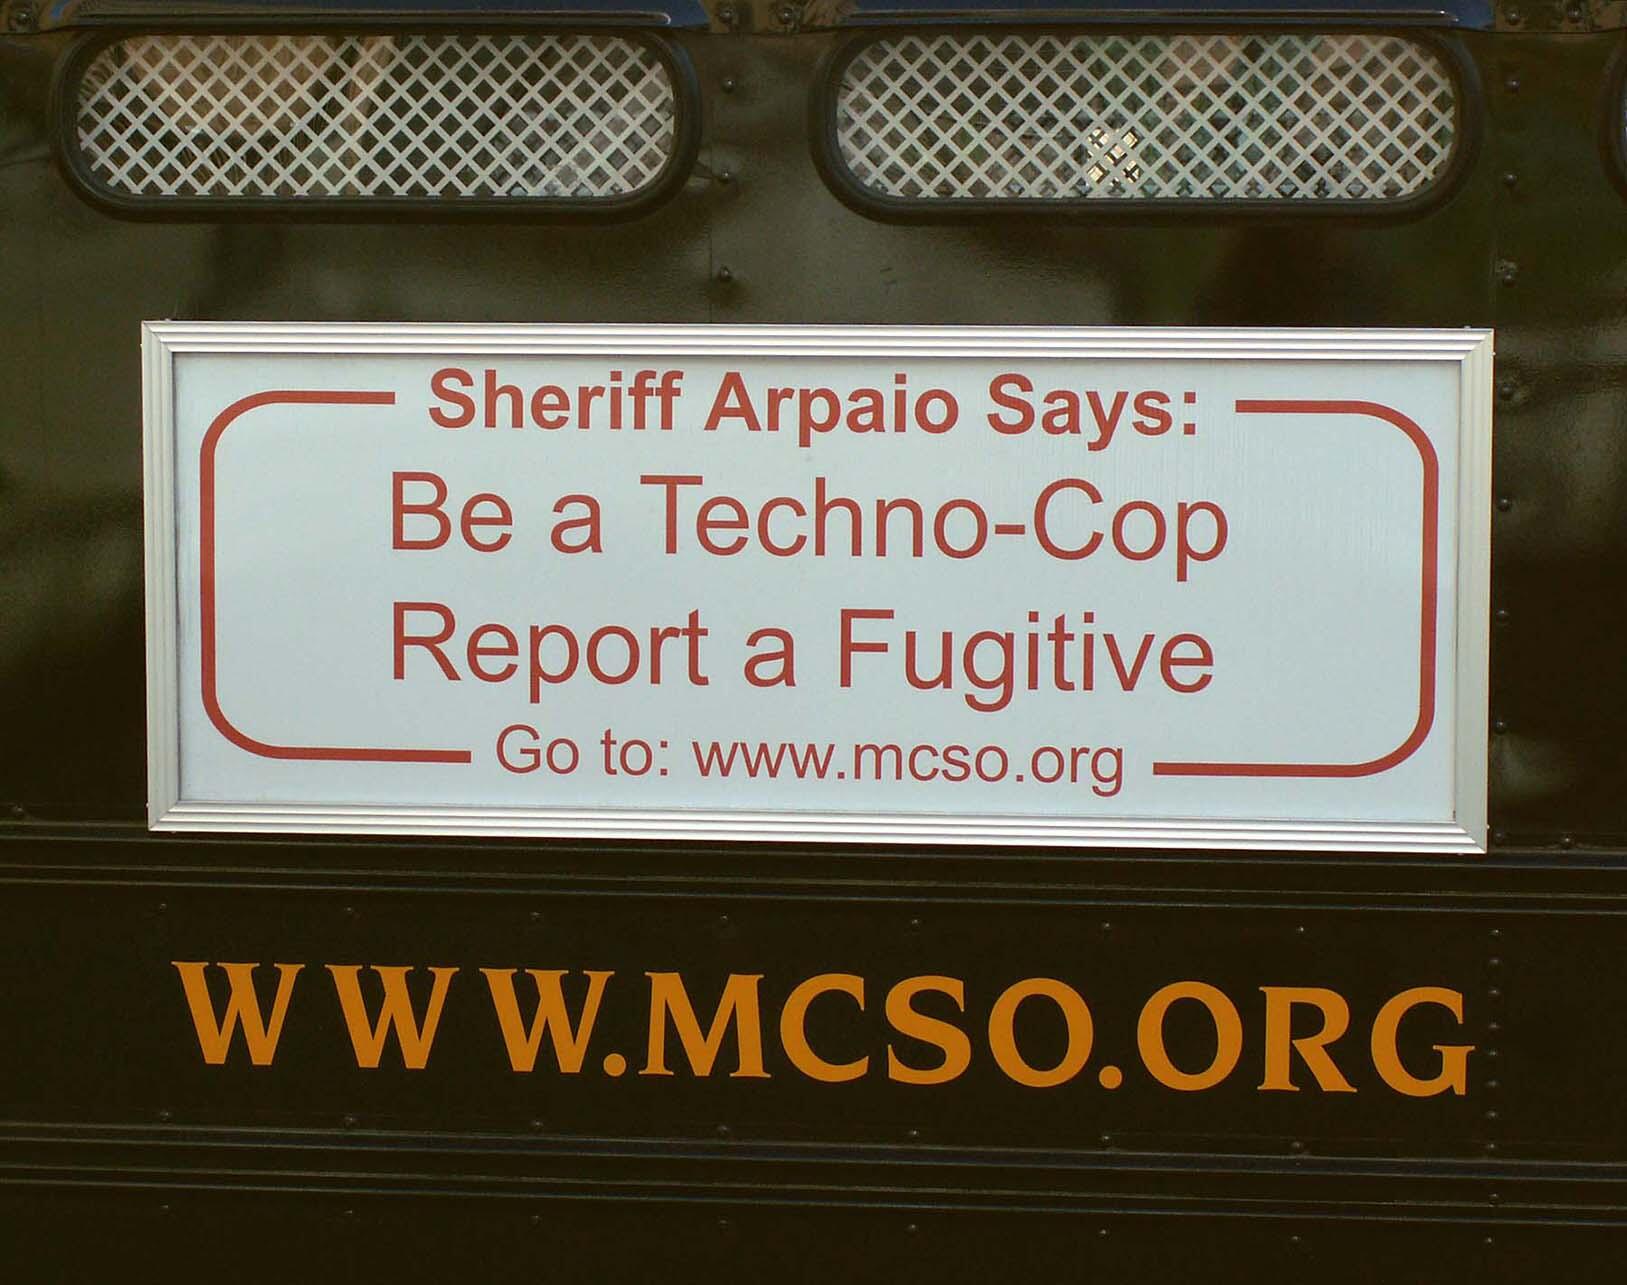  a bumper sticker encouraging reporting migrants to law enforcement. (Photo by cobalt123.)